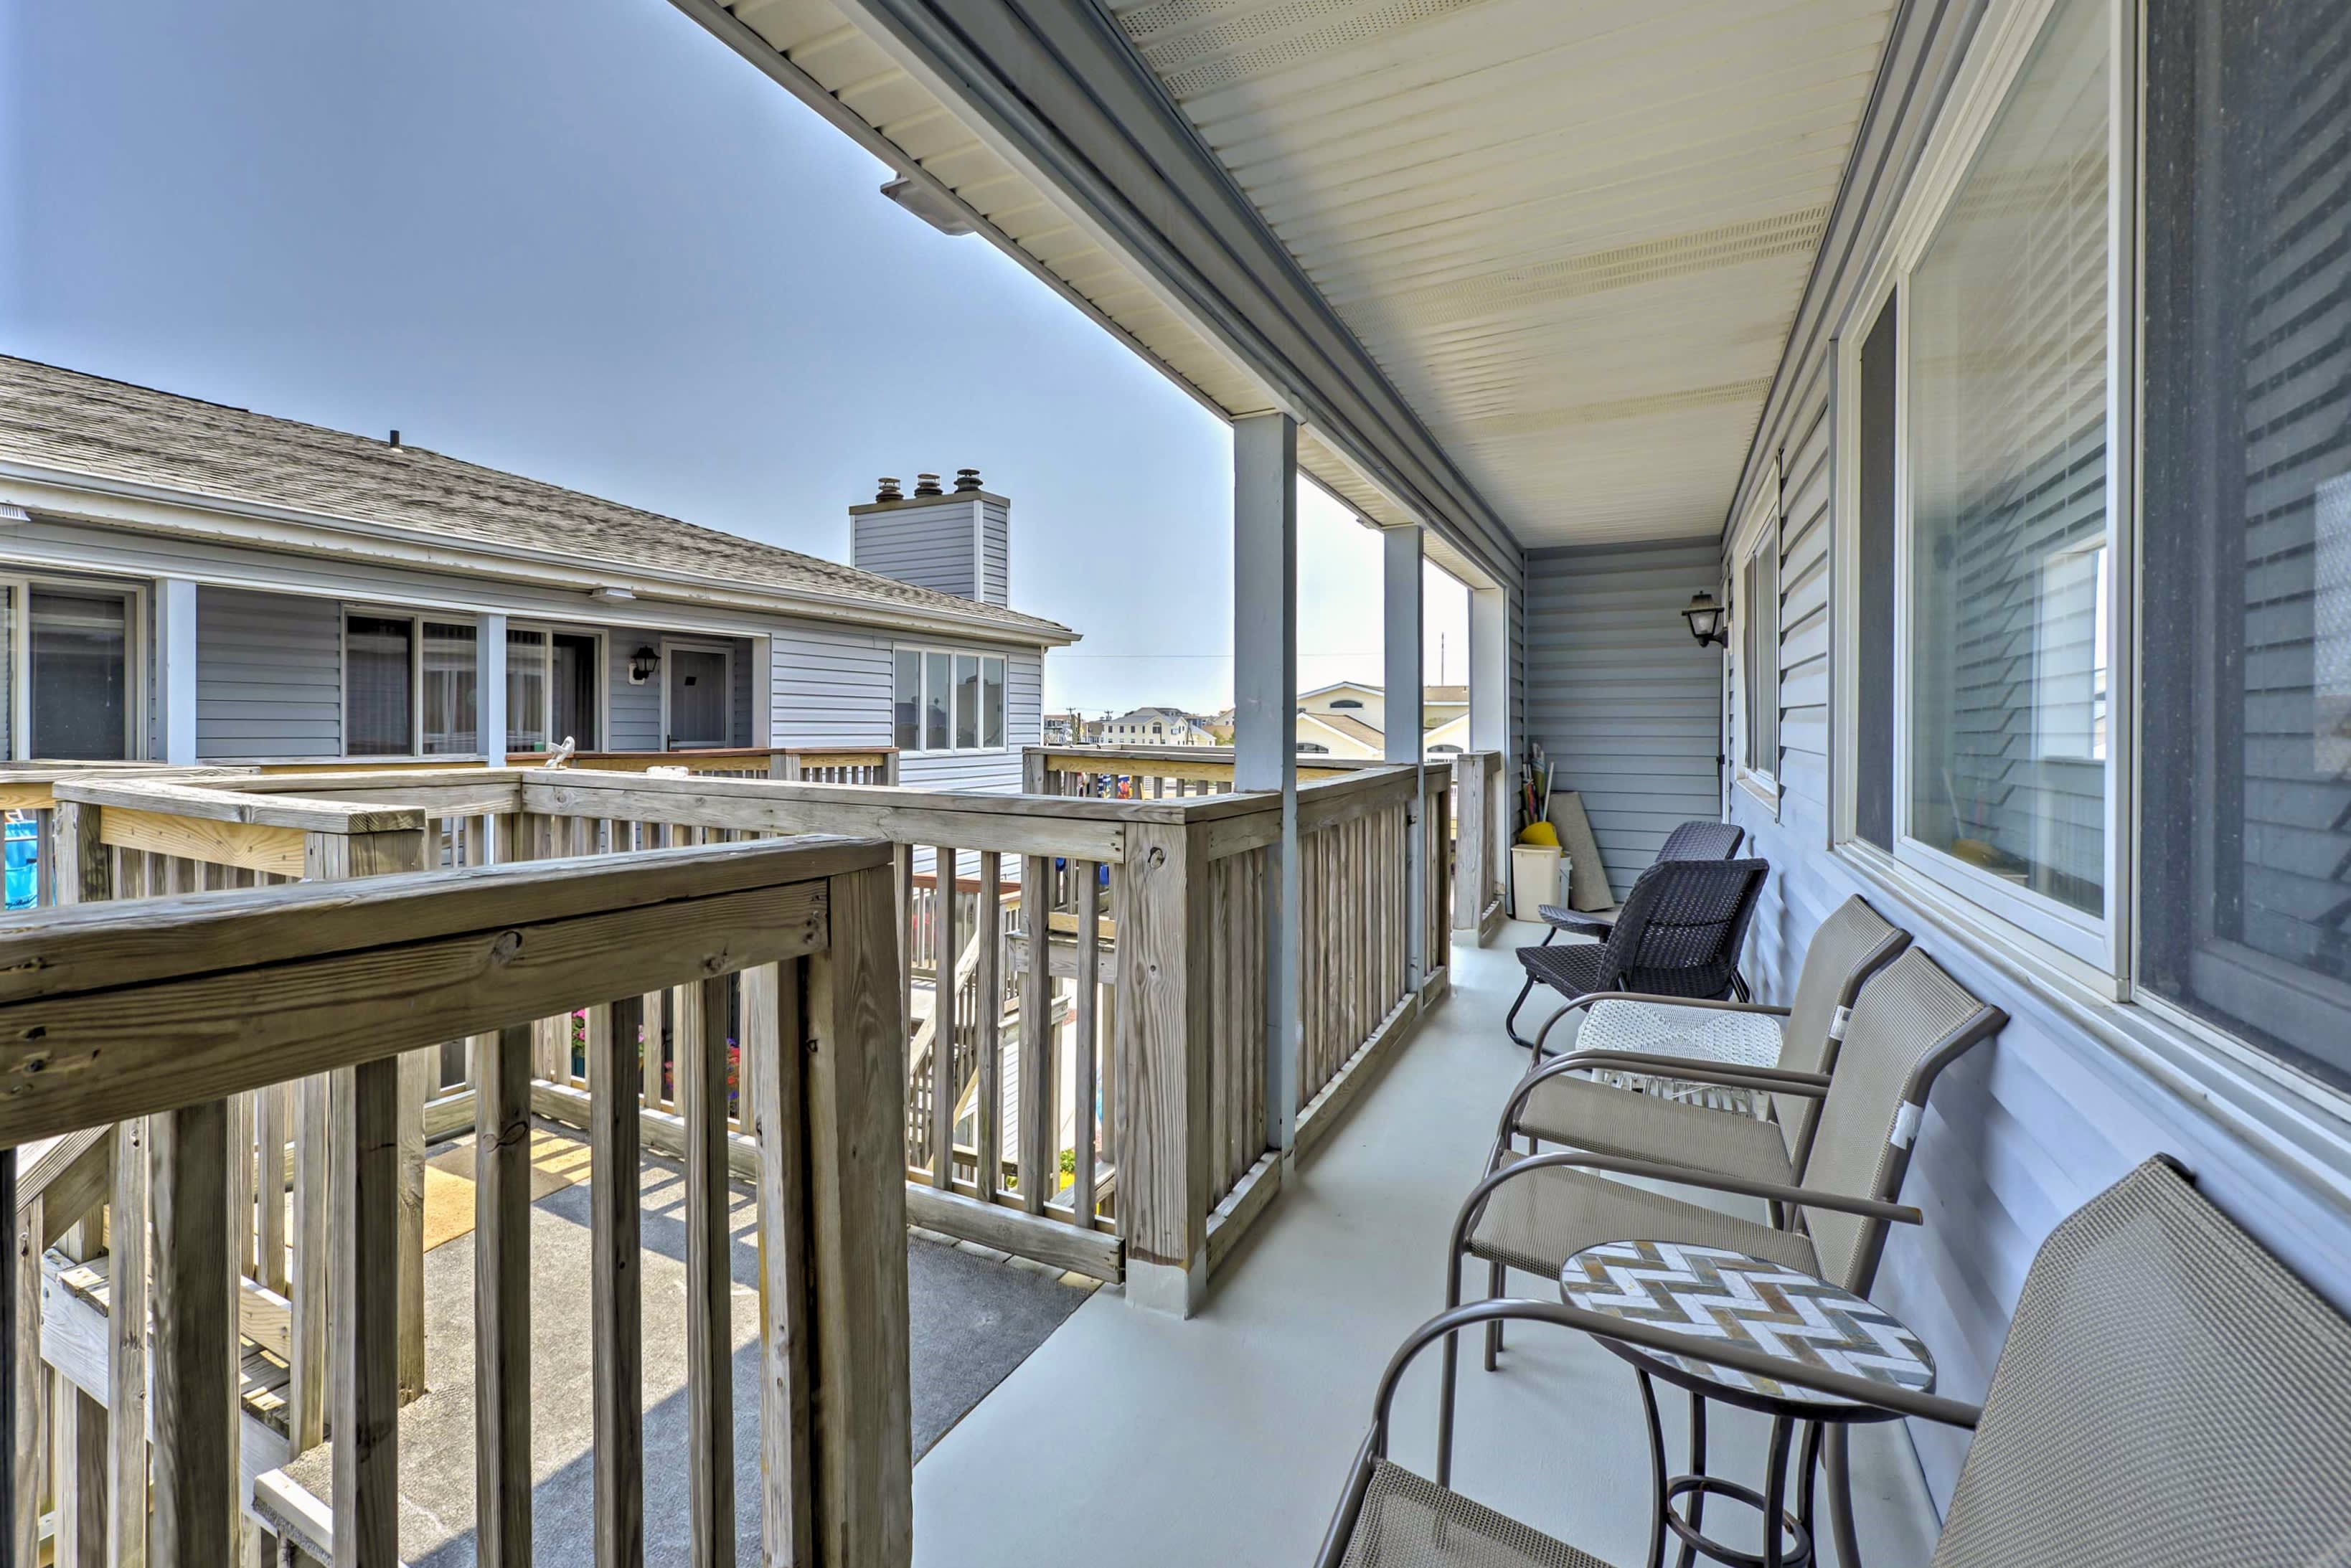 Sea Isle City Vacation Rental | 3BR | 1.5BA | Stairs Required for Entry